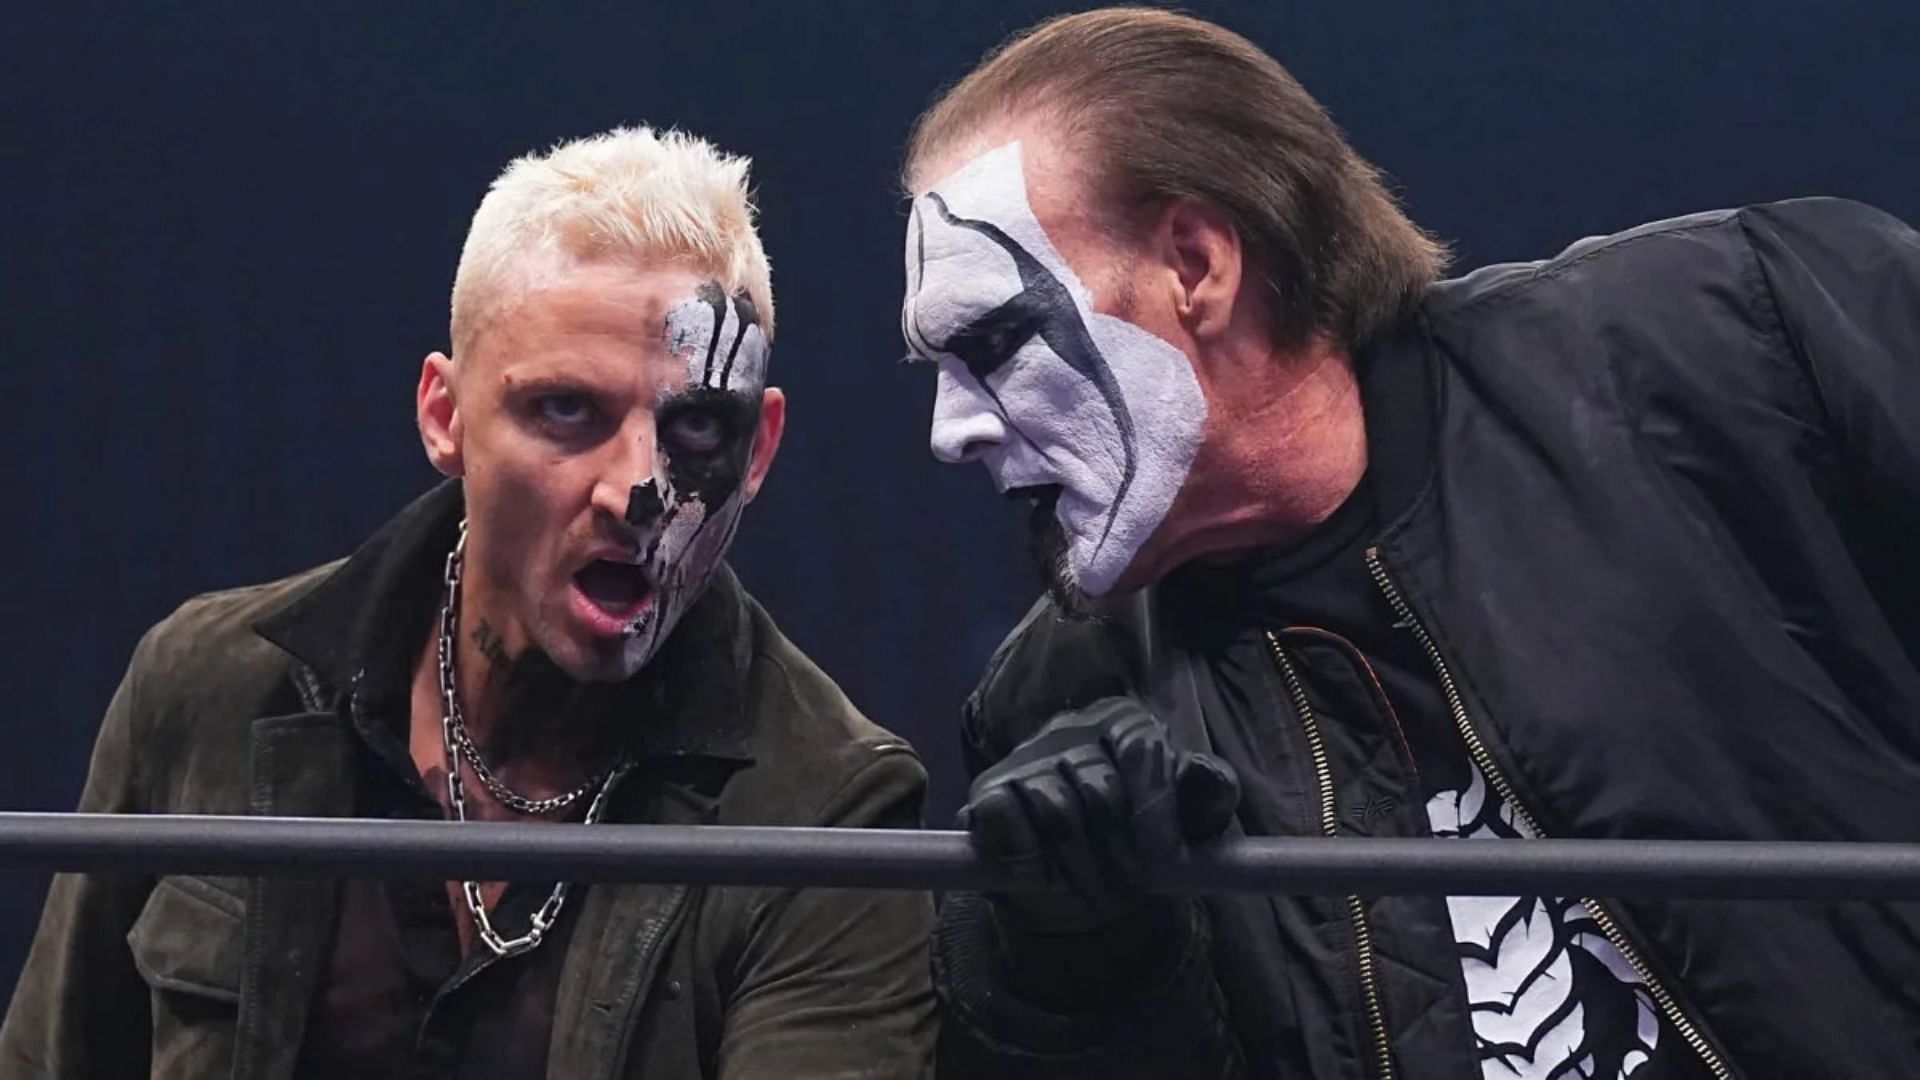 Will Sting be able to rise up to the challenge to take on these stars?